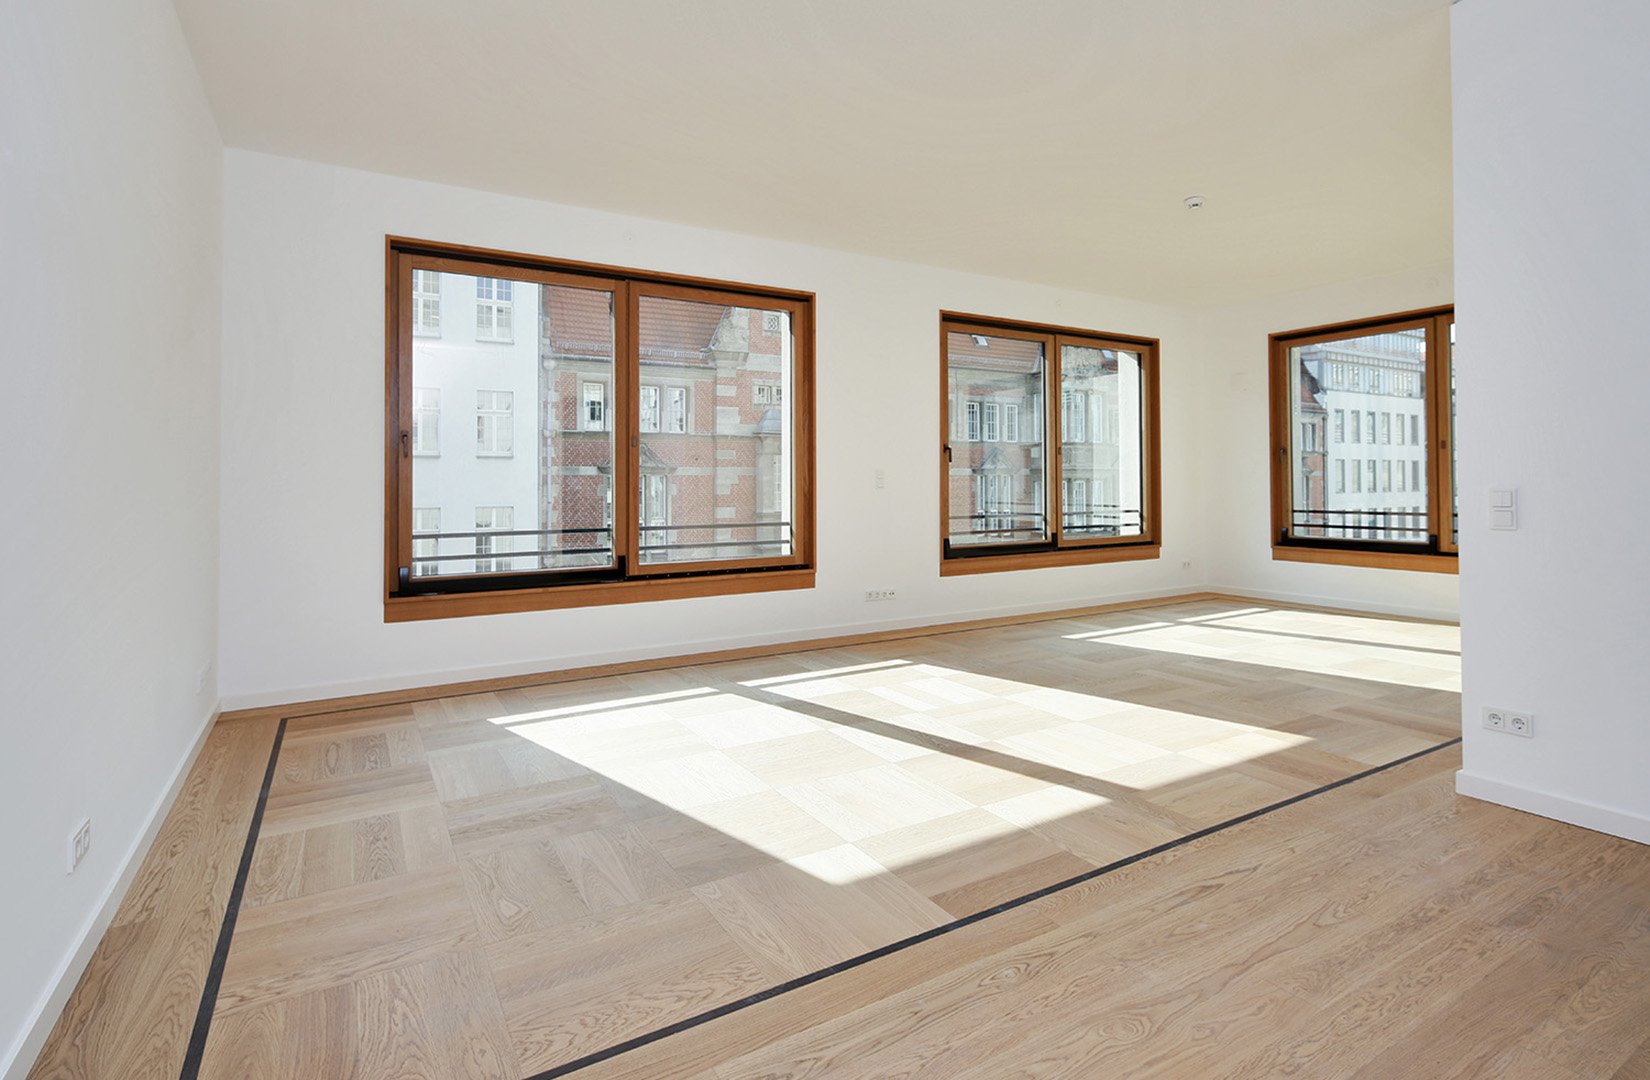 Palais Varnhagen by David Chipperfield luxury real estate successfully sold